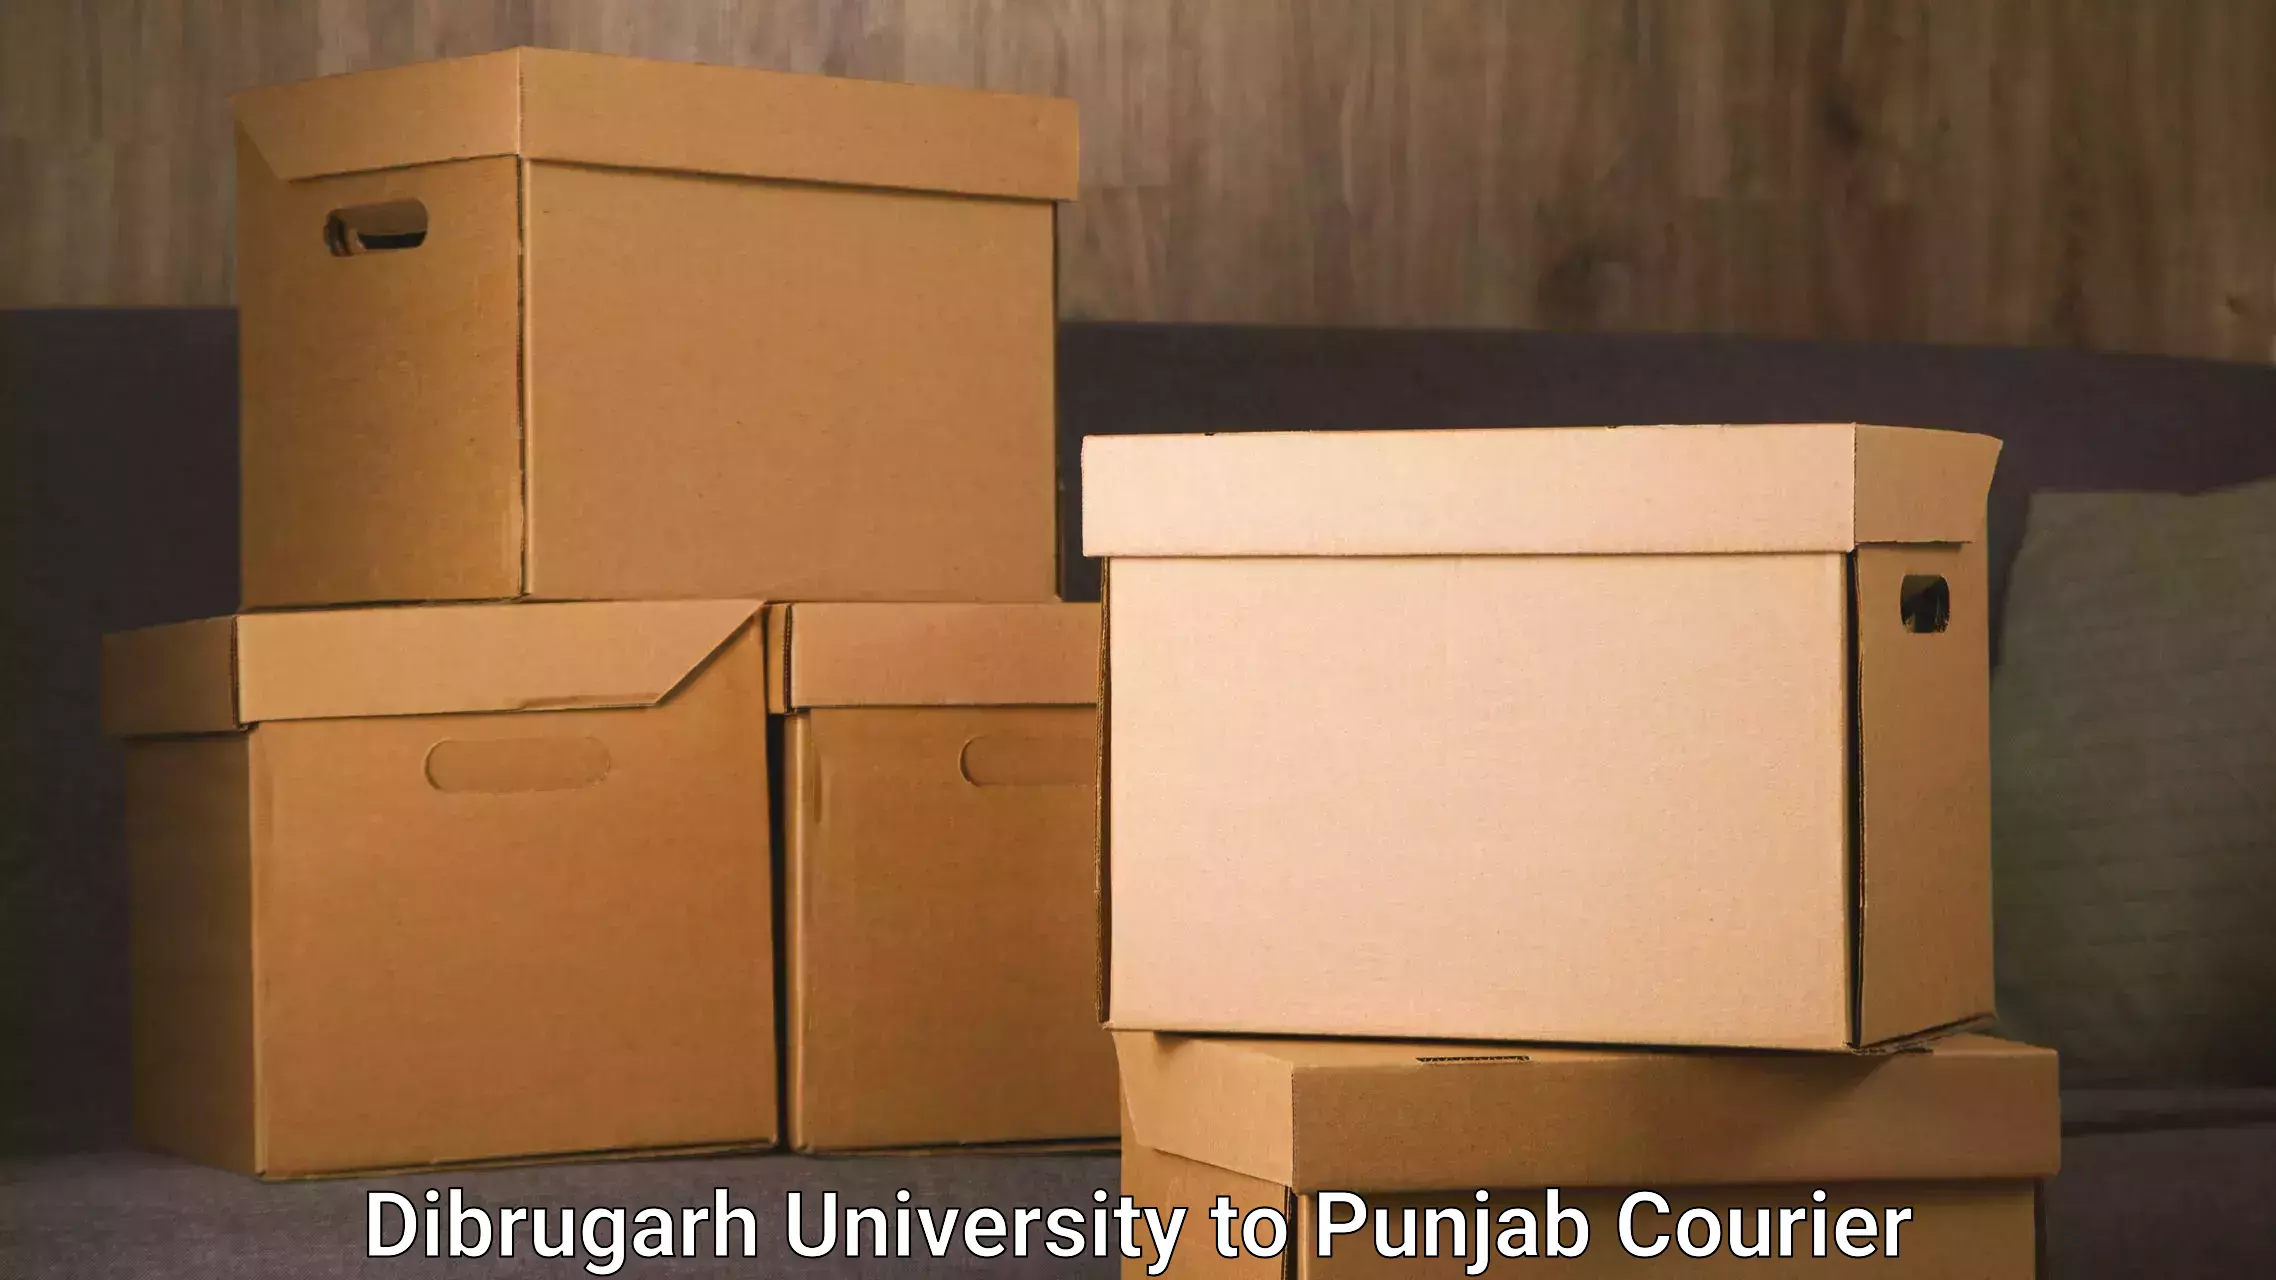 Automated parcel services Dibrugarh University to Tarsikka